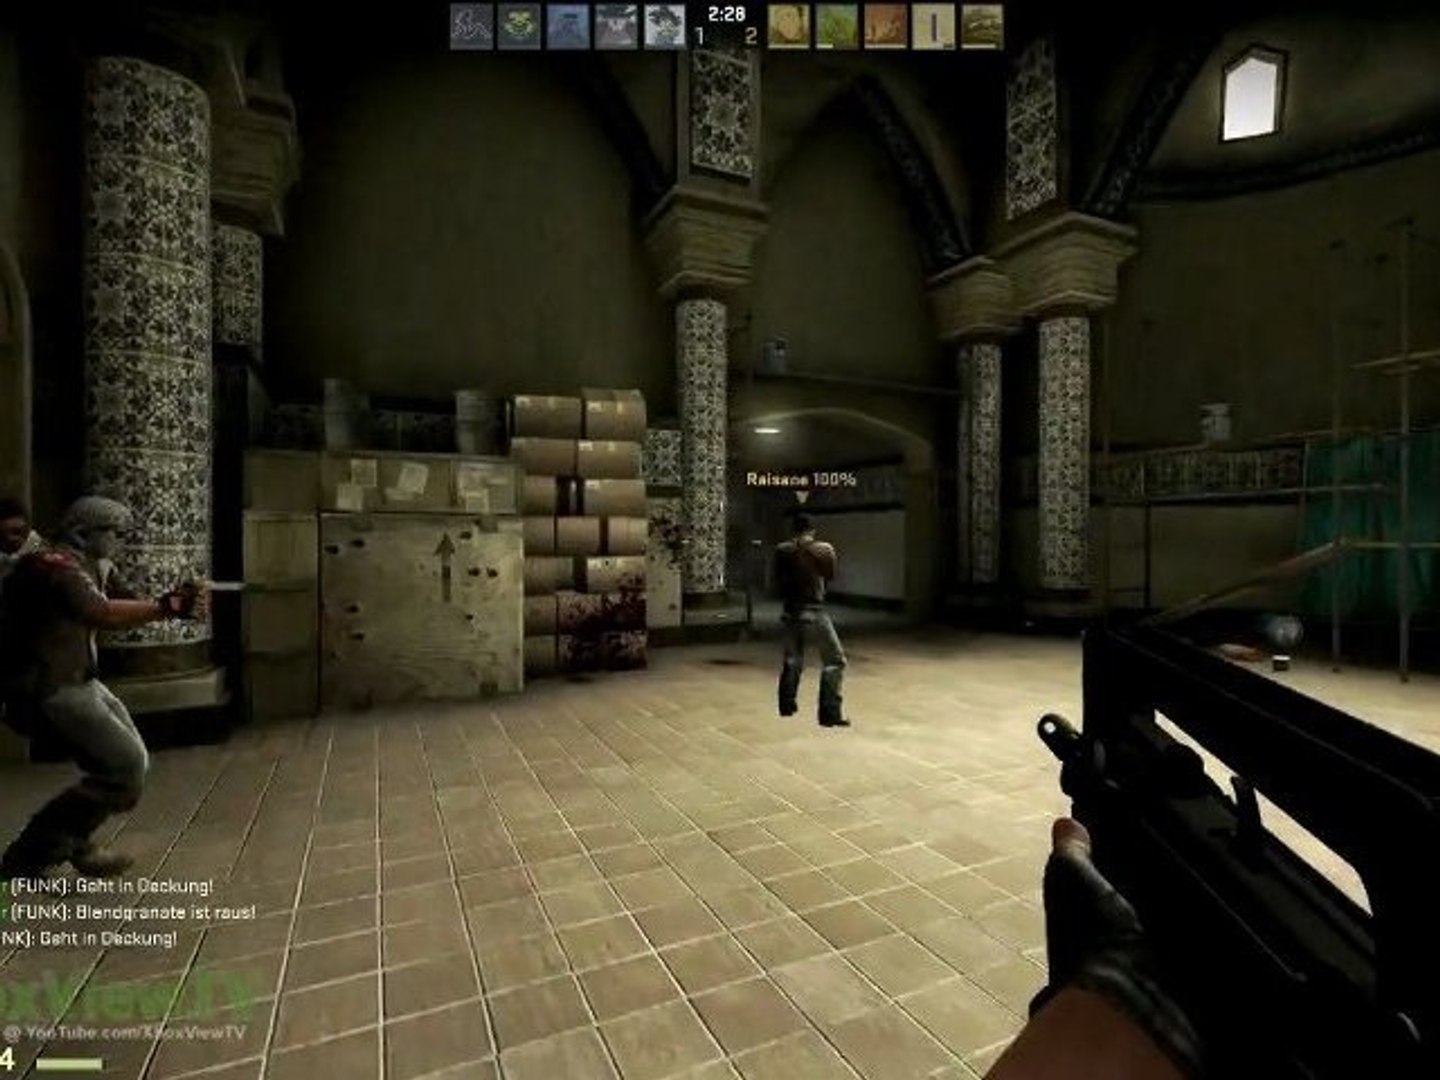 Download Counter Strike Global Offensive Beta Game Free!! - Tutorial -  video Dailymotion